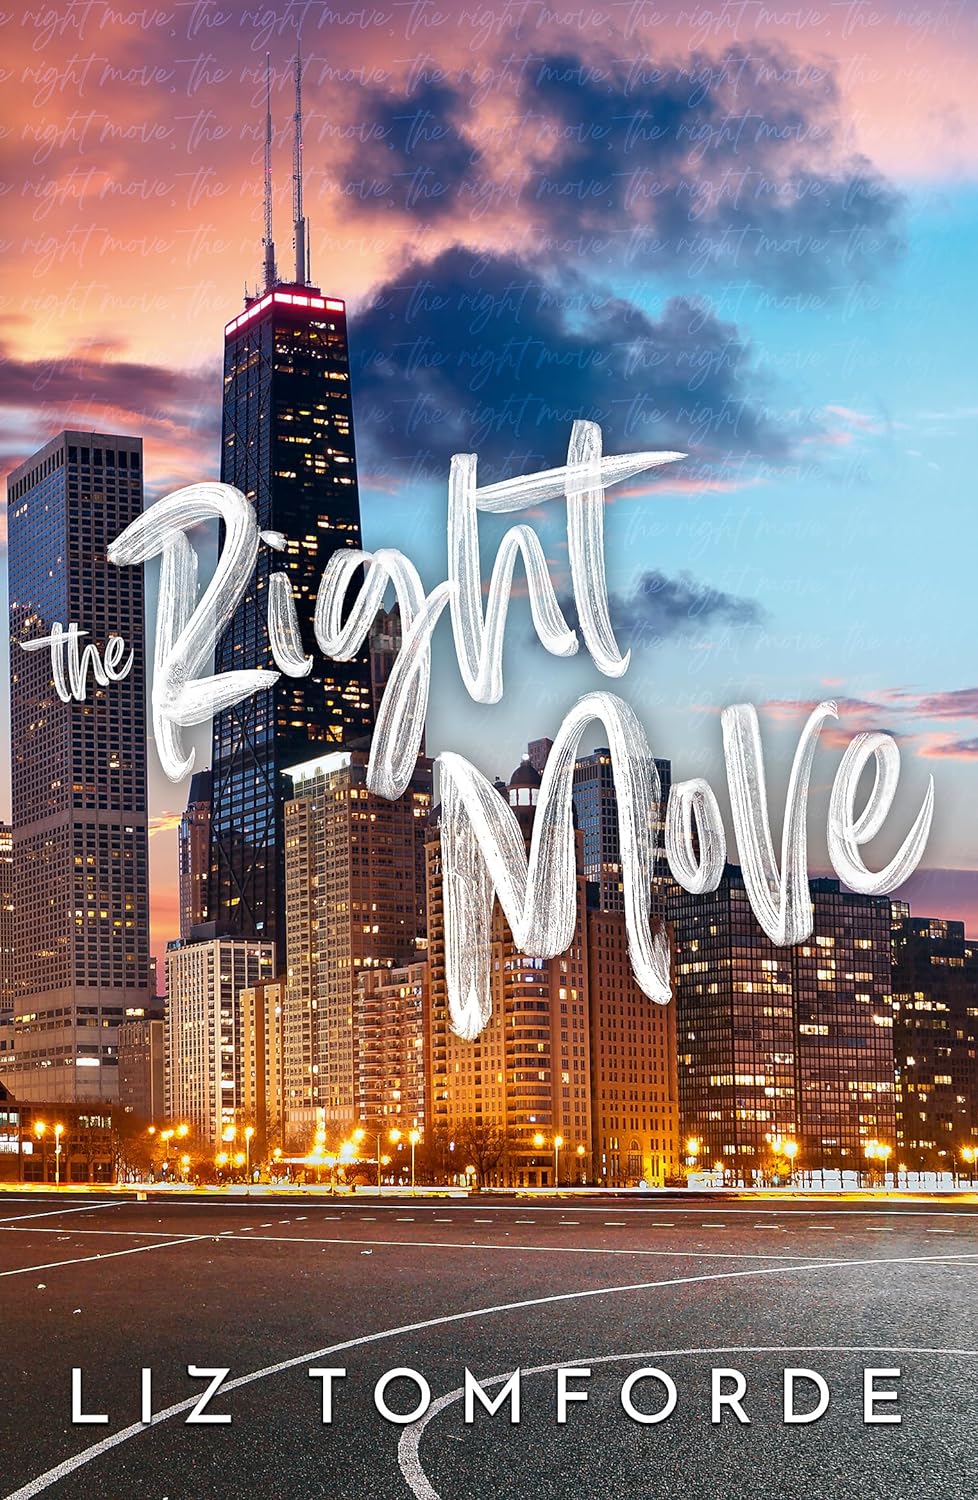 RIGHT MOVE By LIZ TOMFORDE